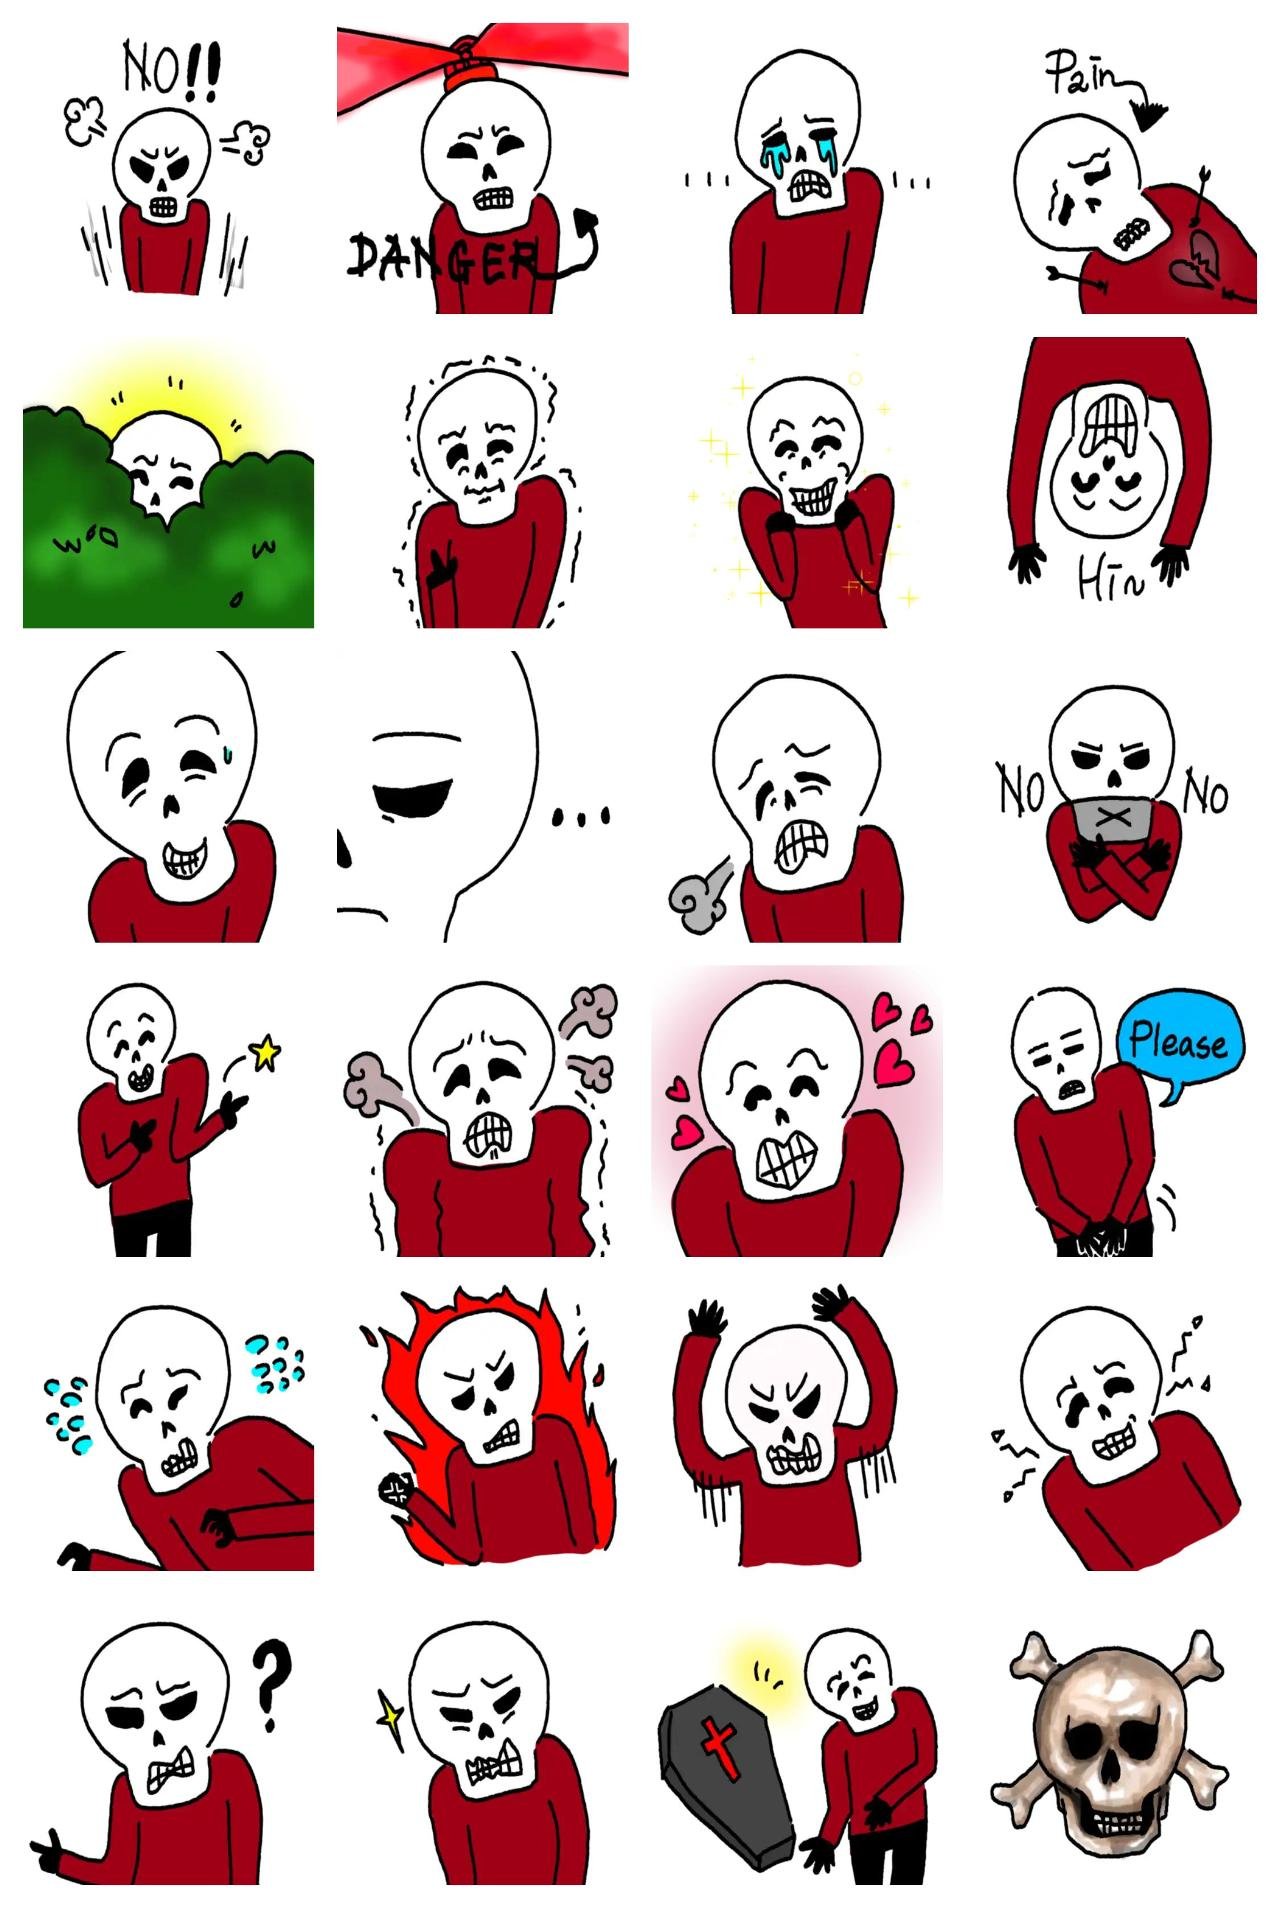 Skeleton Etc. sticker pack for Whatsapp, Telegram, Signal, and others chatting and message apps